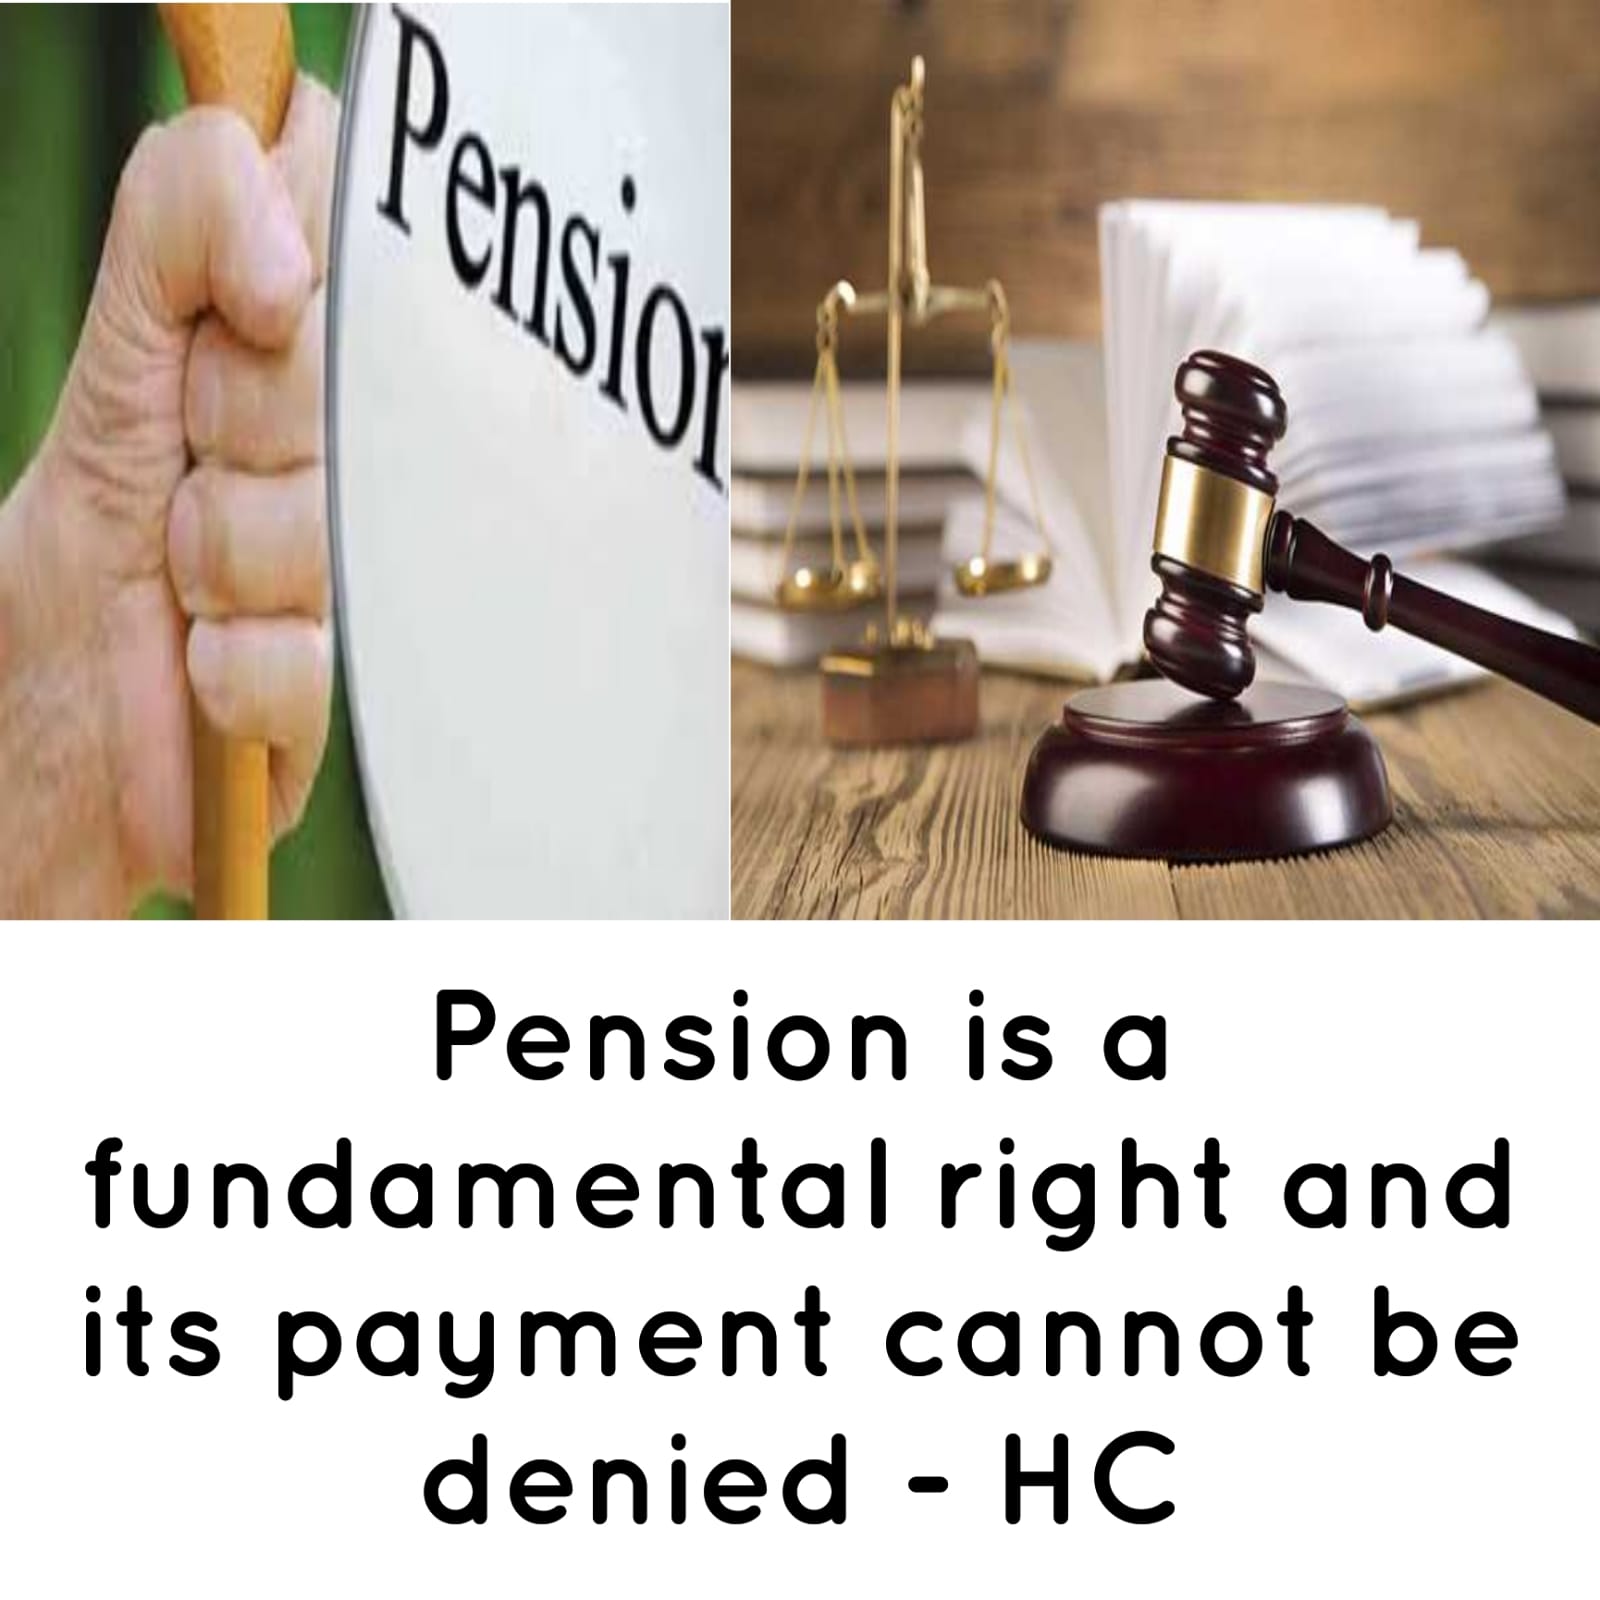 Pension is a fundamental right and its payment cannot be denied - HC